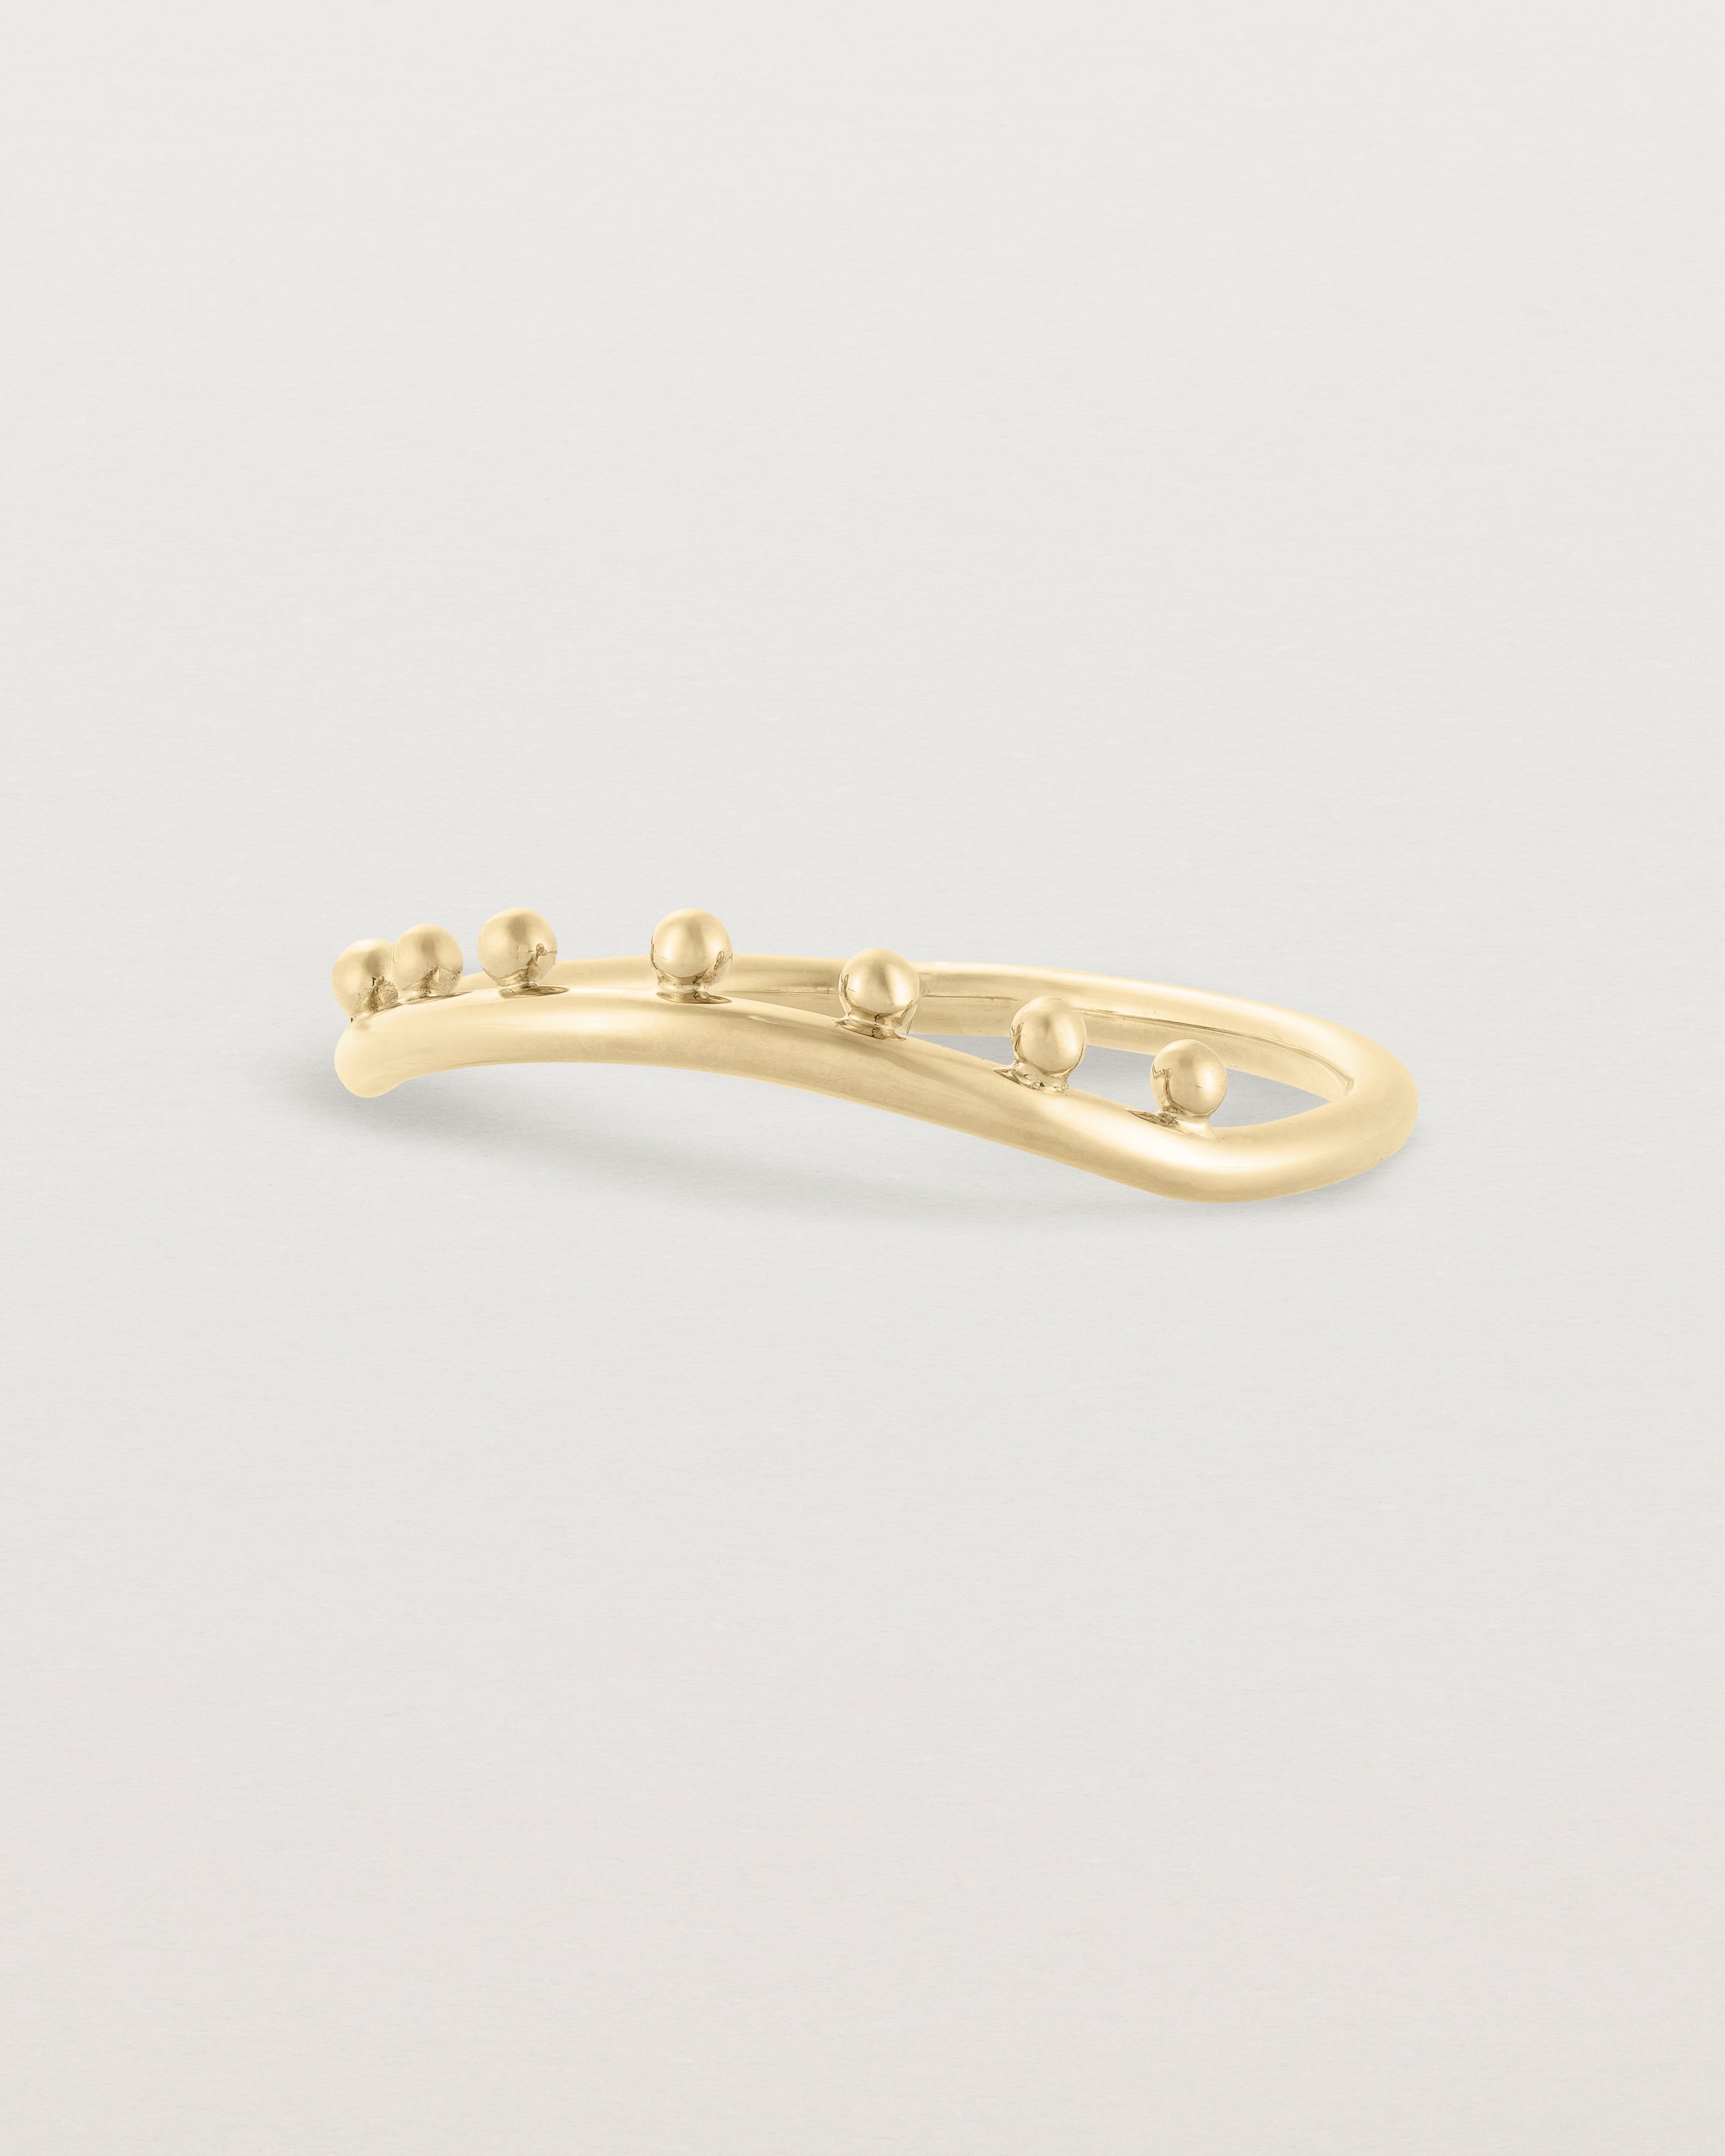 The side view of a gentle arc ring with dot detailing along the top of the arc, crafted in yellow gold